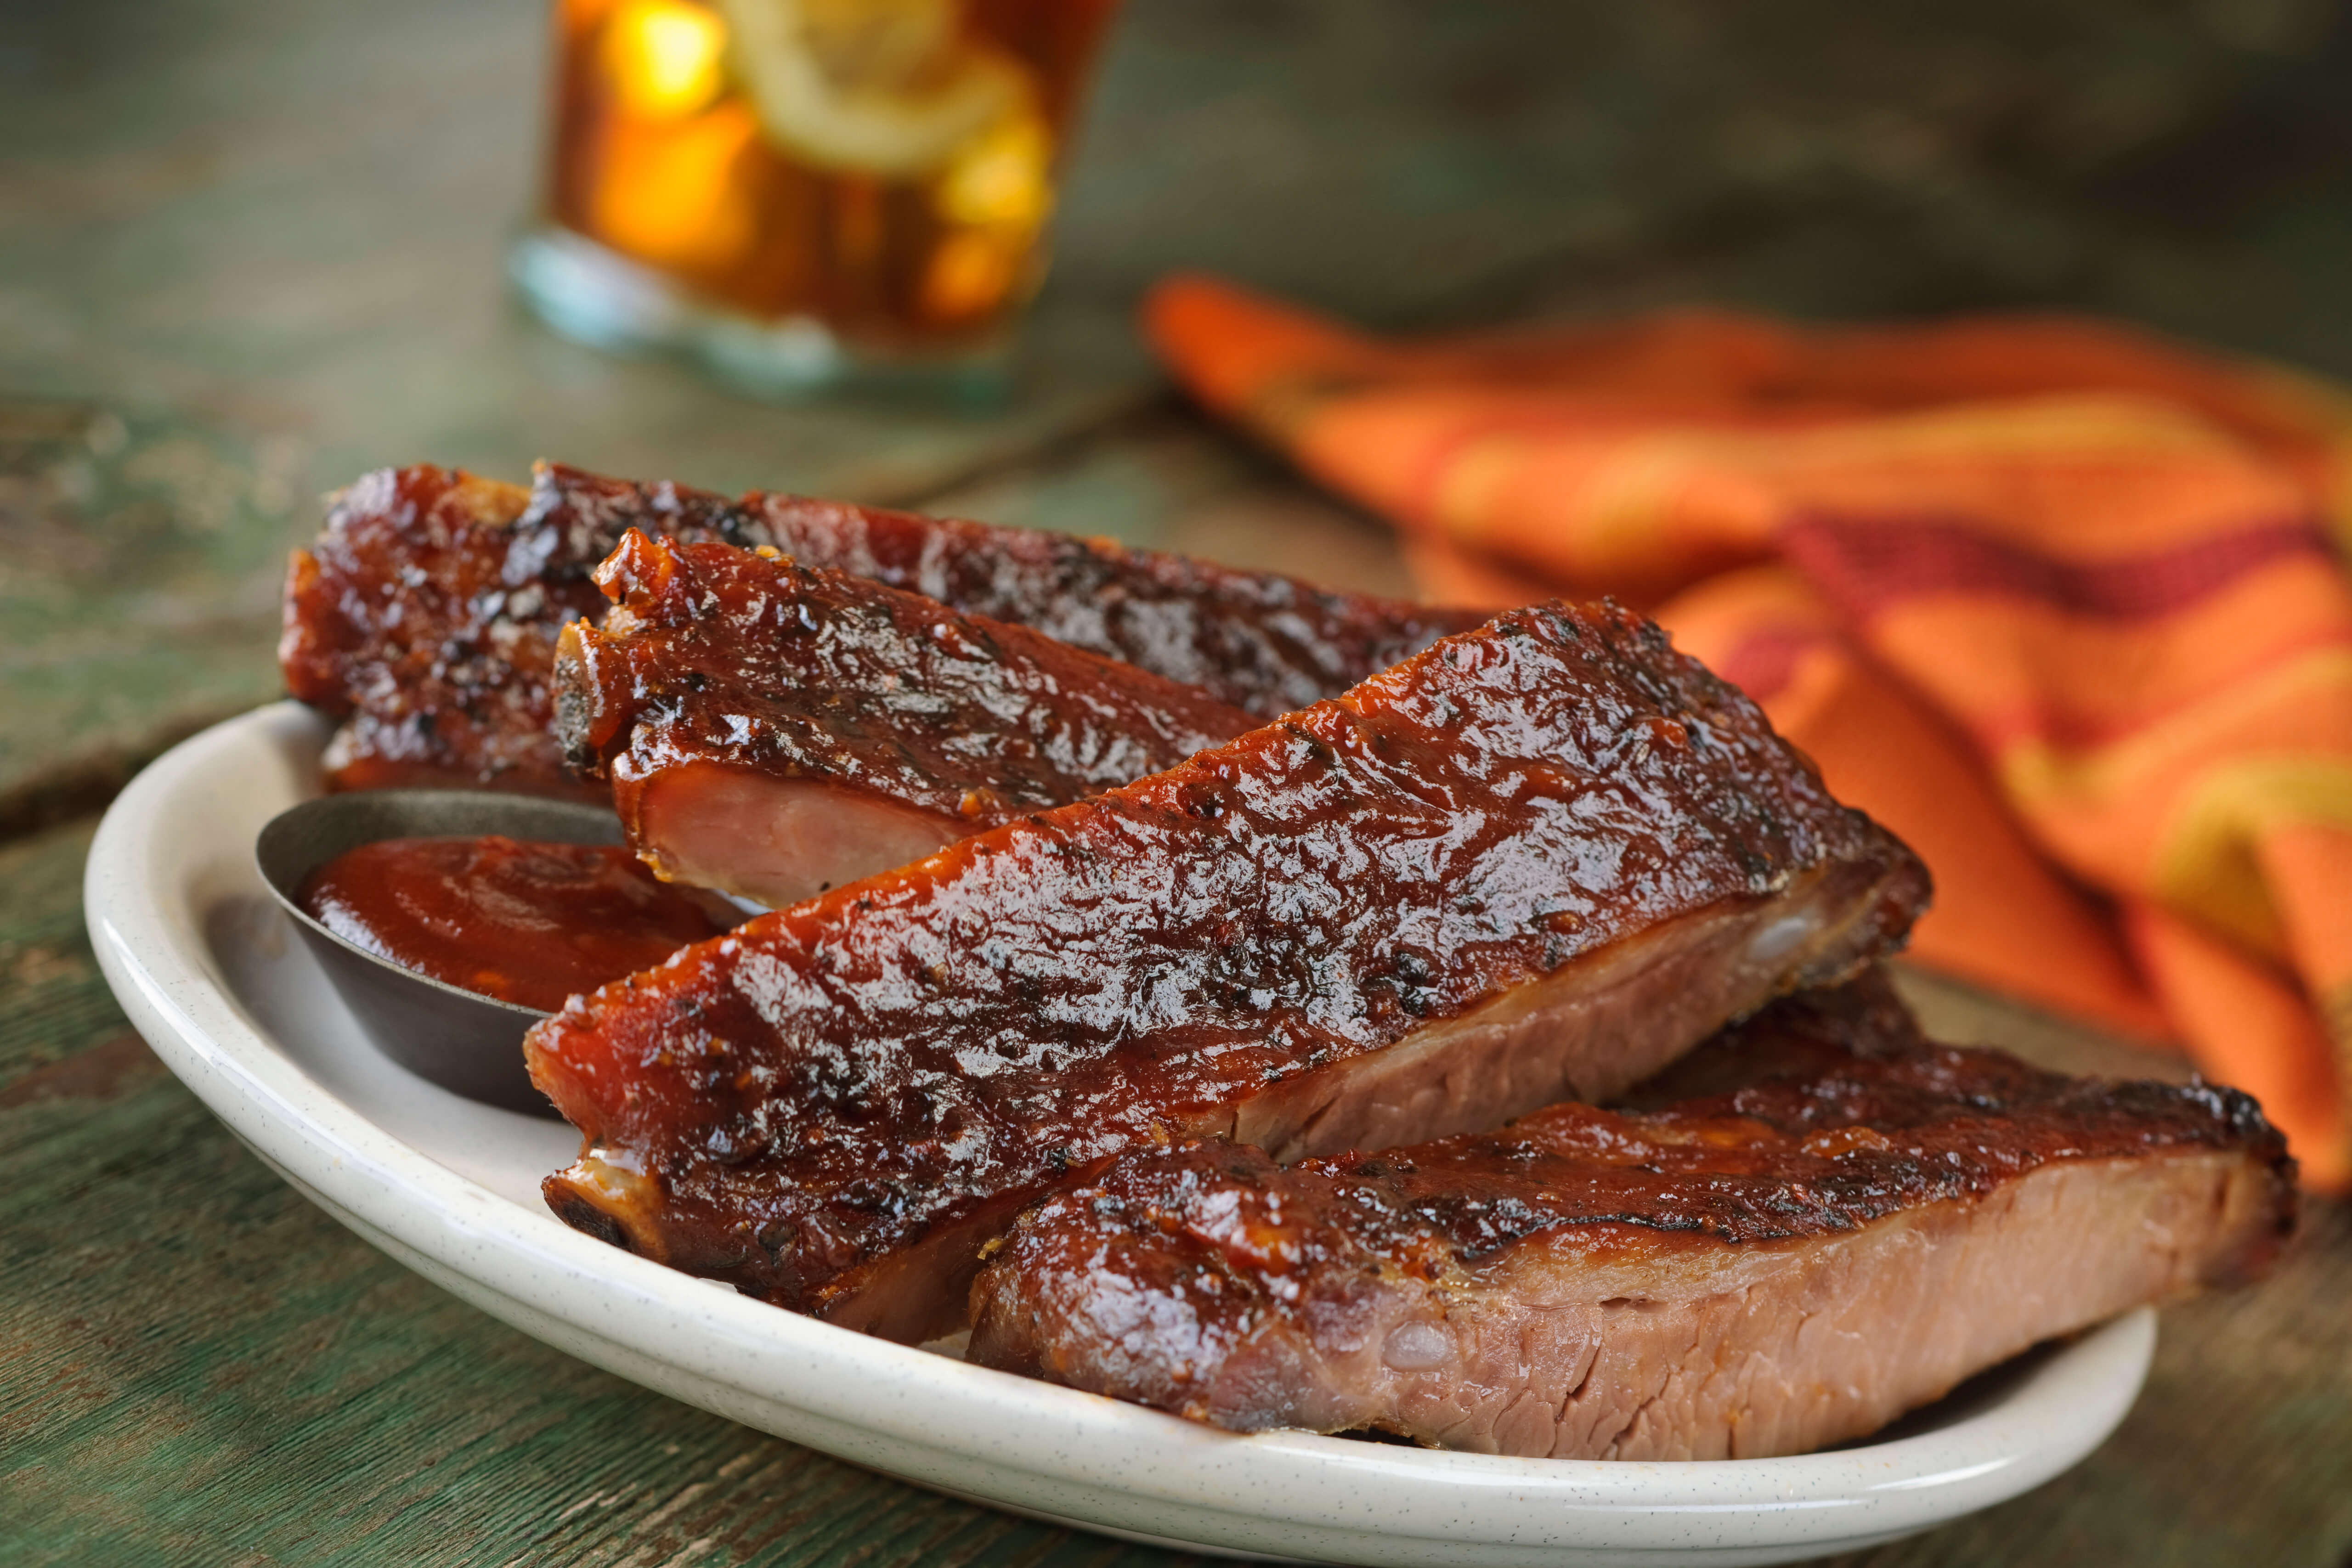 The ultimate summer bbq dish, ribs are always a hit.